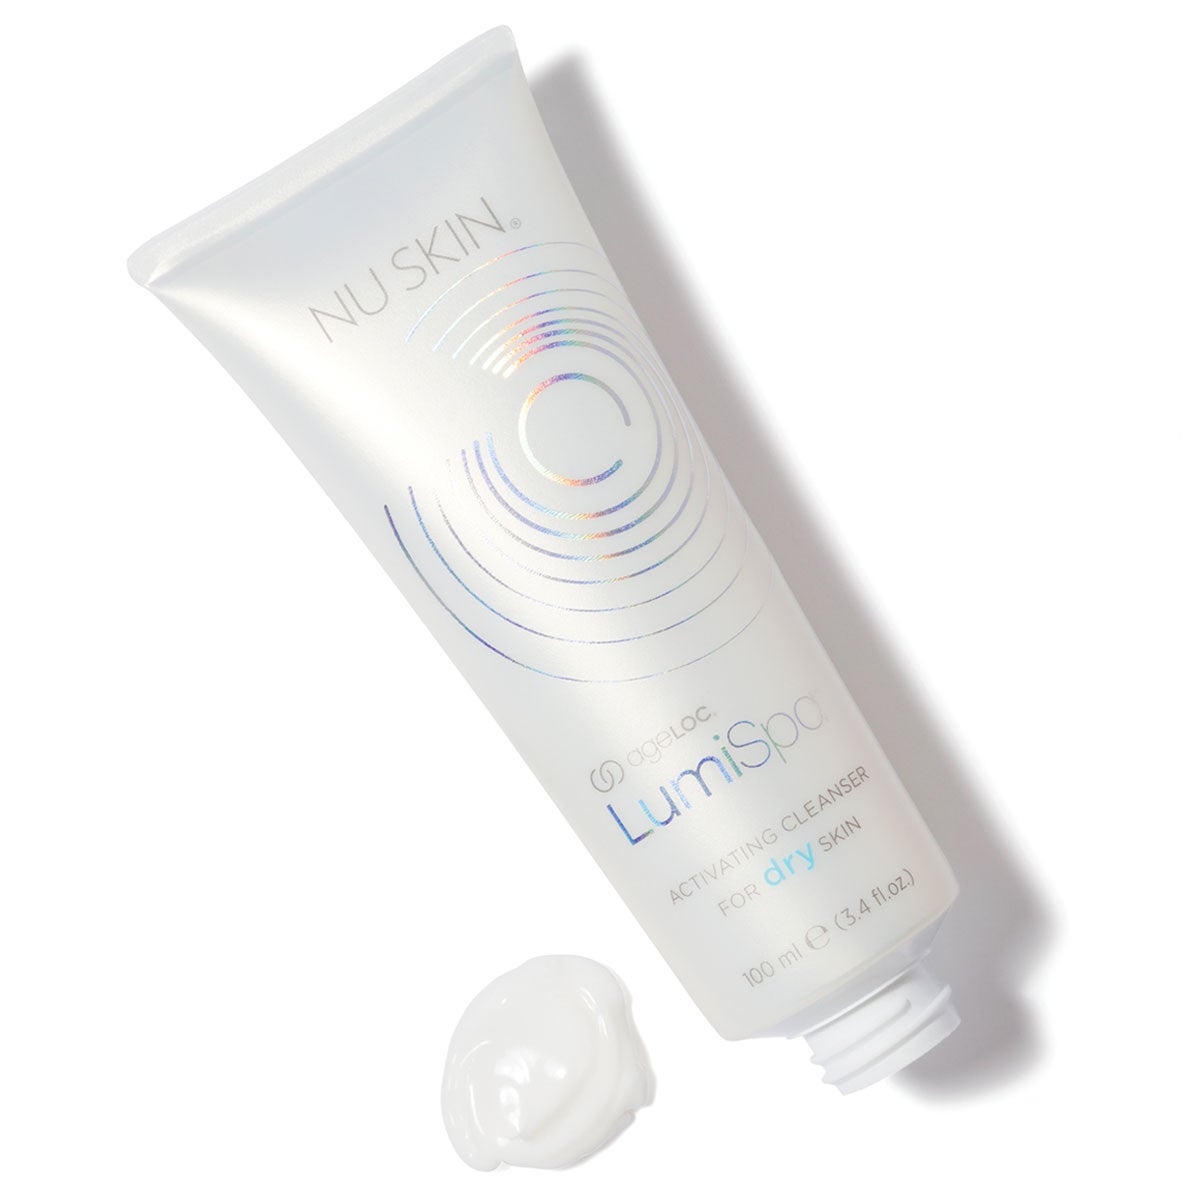 LumiSpa Cleanser Dry White Background with Product Blob